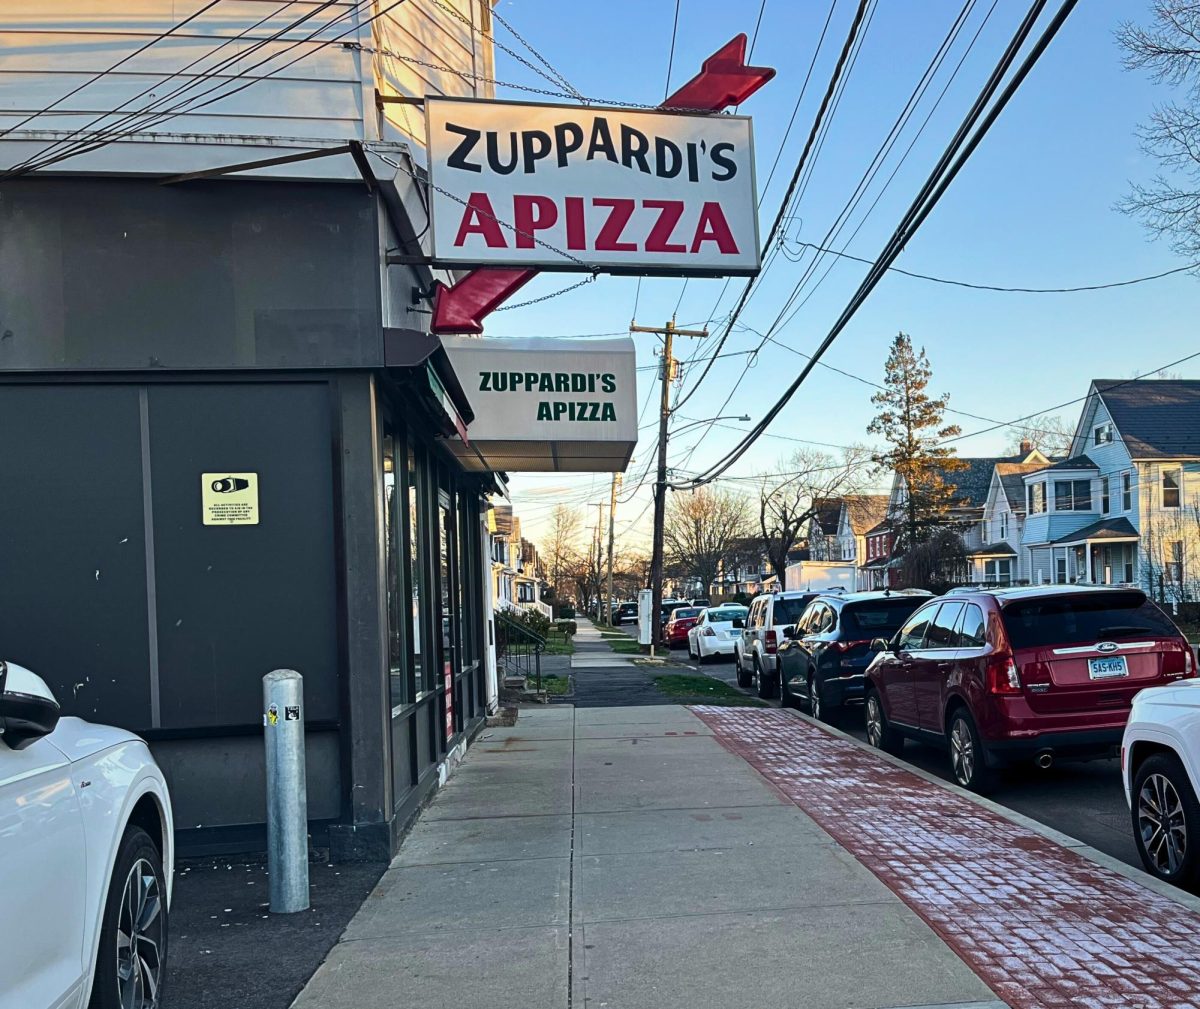 Across Towns: In 1934, Dominic Zuppardi moved his bakery from New Haven to West Haven, CT, carrying his New Haven Style pizza across towns. Many New Haven pizza establishments were opened in the early 20th century, showing the rich history of the business.
